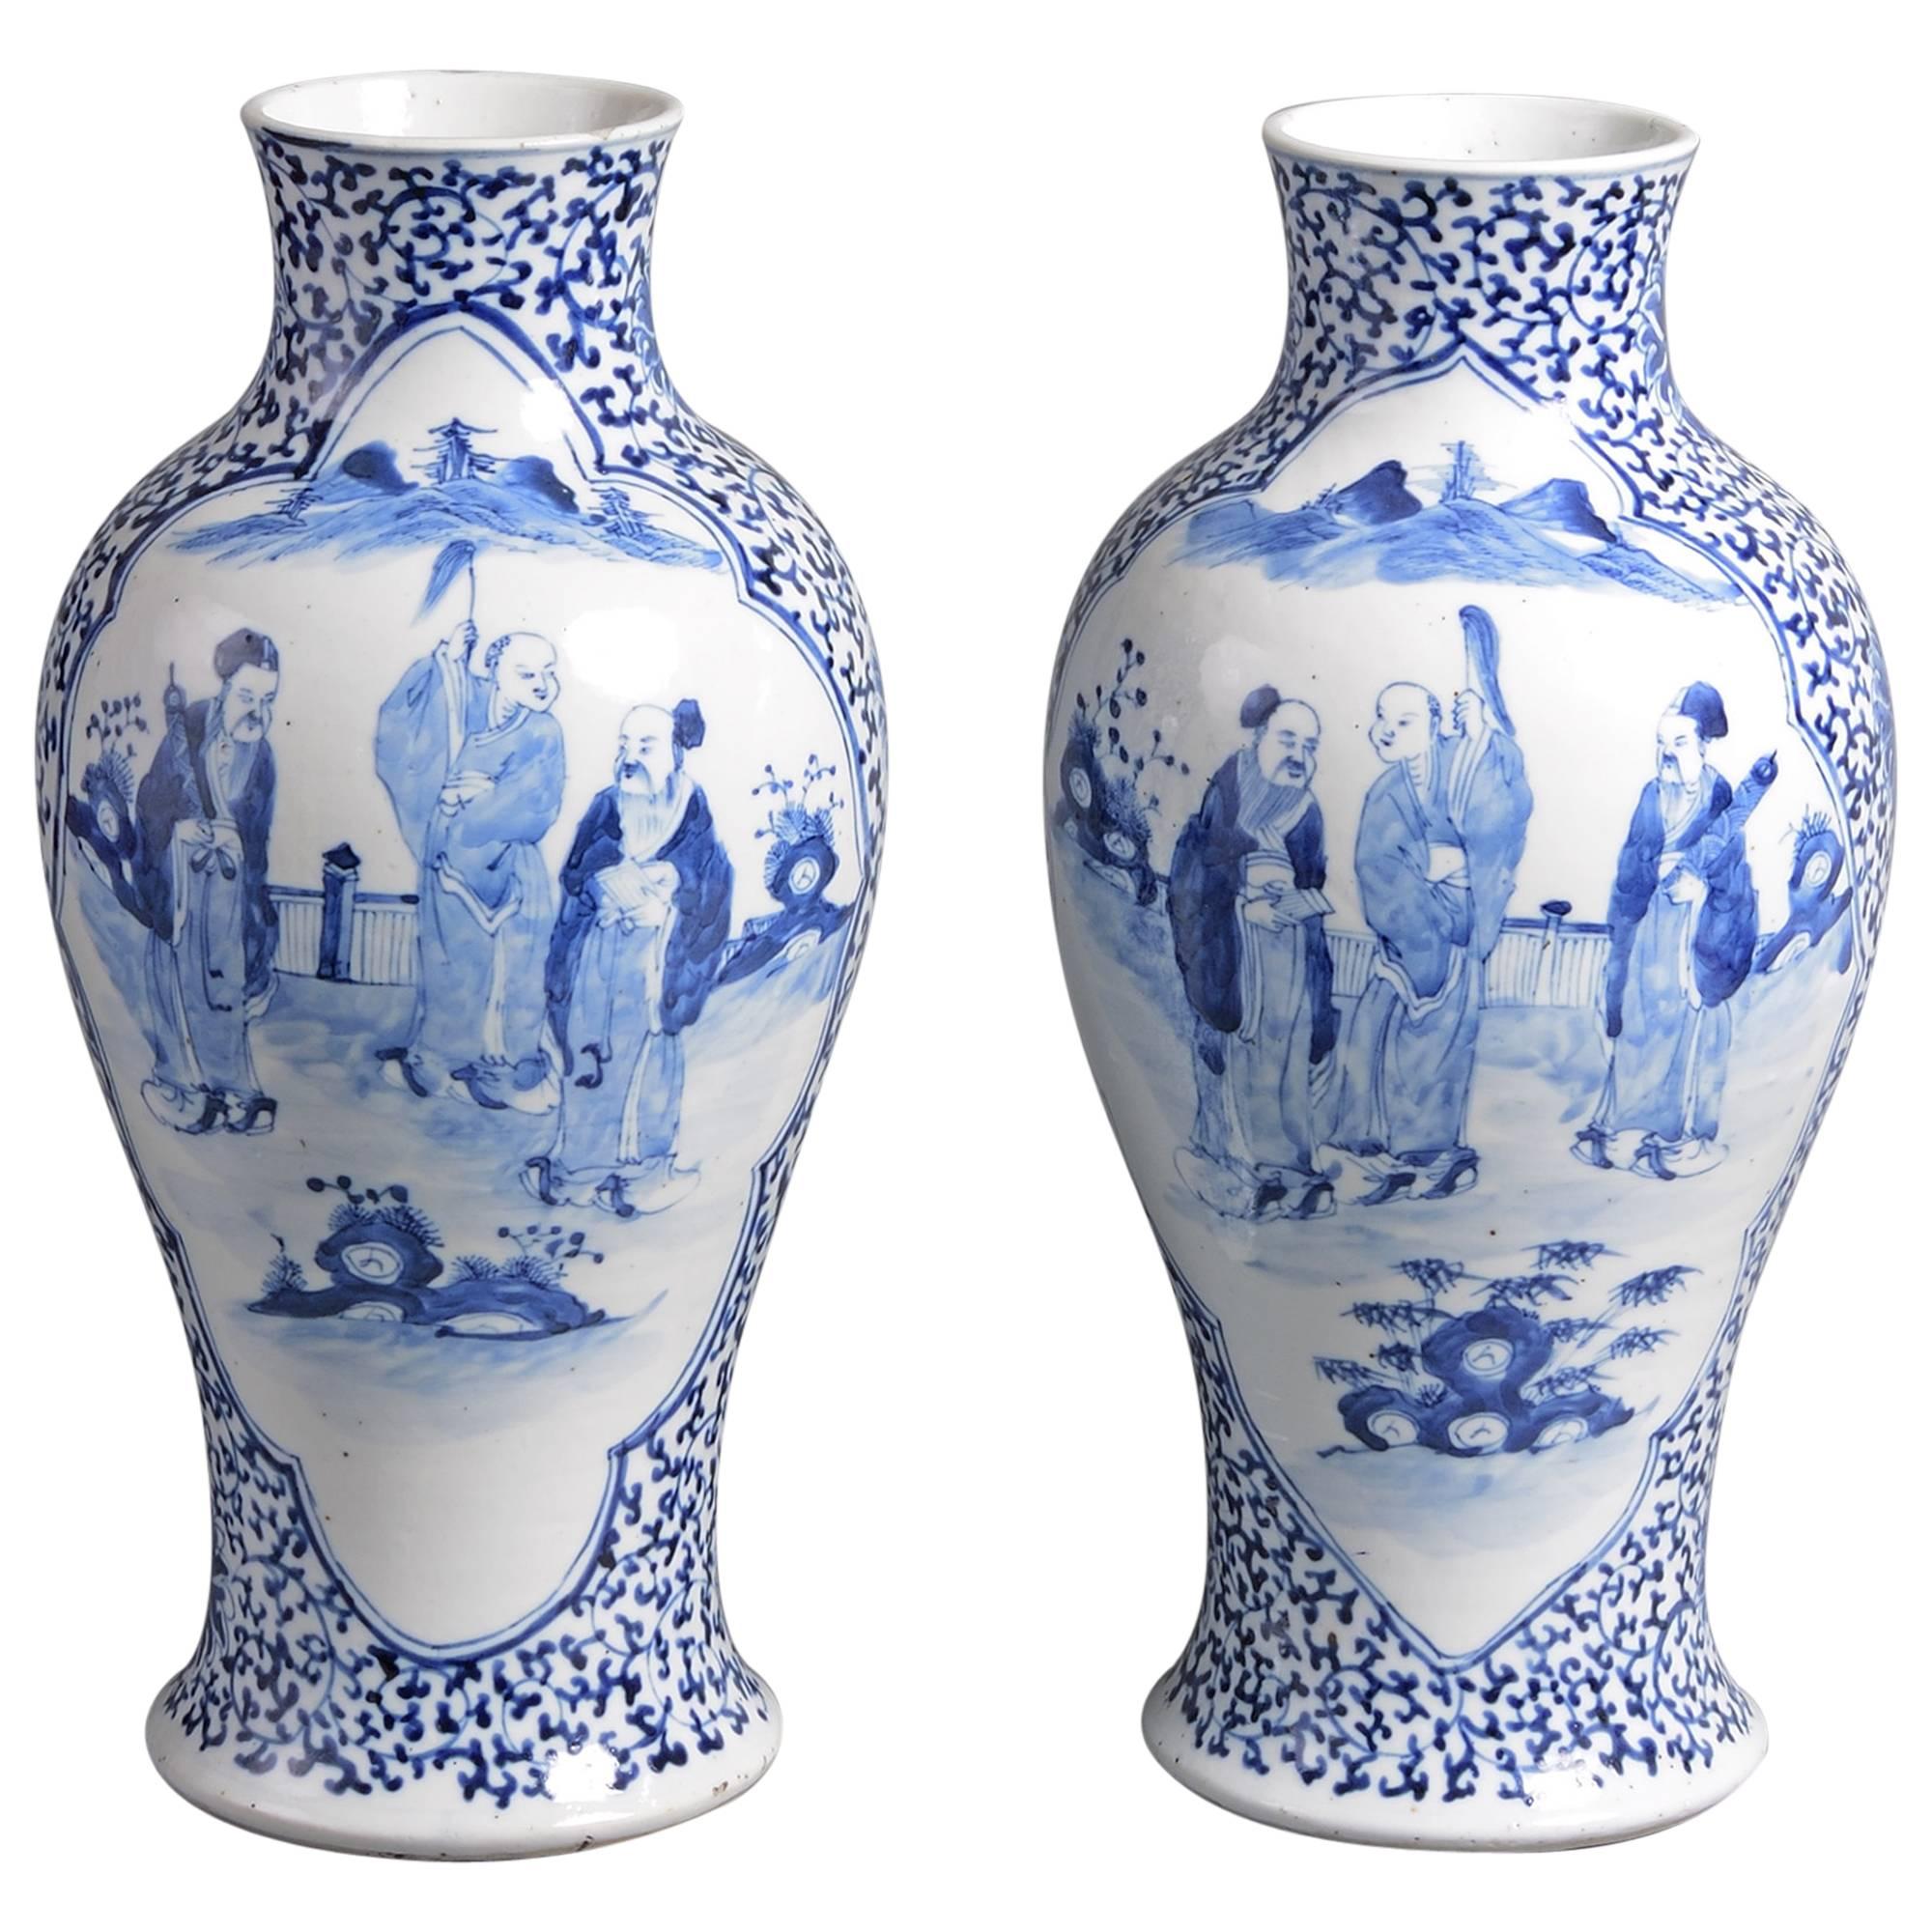 Pair of 19th Century Qing Period Blue and White Porcelain Vases